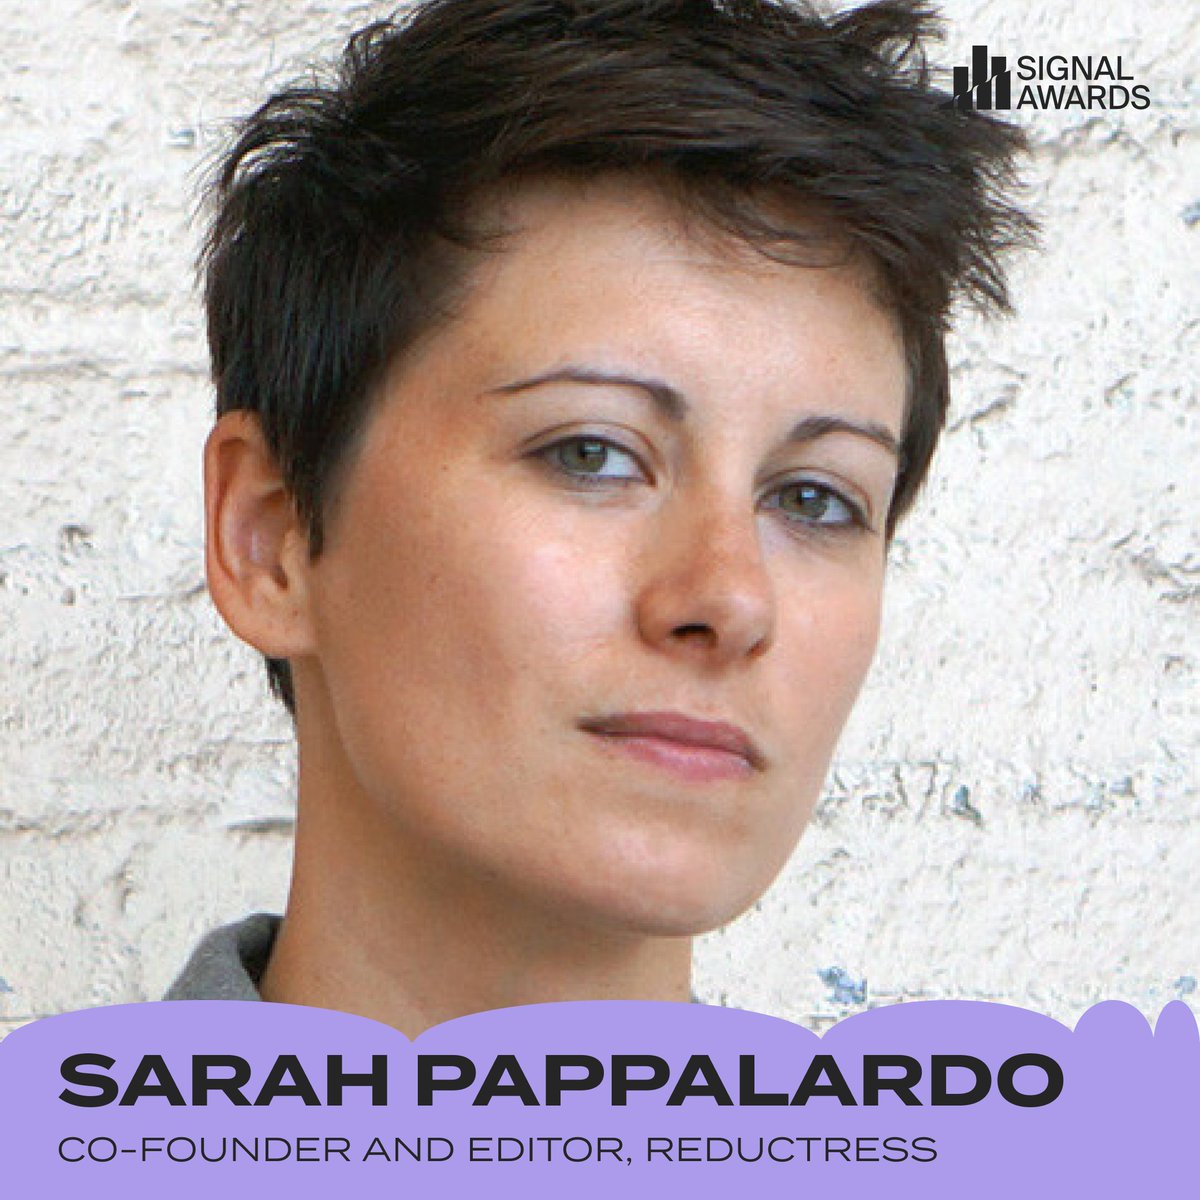 Join us in spotlighting Sarah Pappalardo, Co-founder and Editor of @Reductress, and a Signal Awards judge! 🎧 Learn more about our incredible judges at signalaward.com and enter your podcasts before our Early Entry Deadline on May 10th!